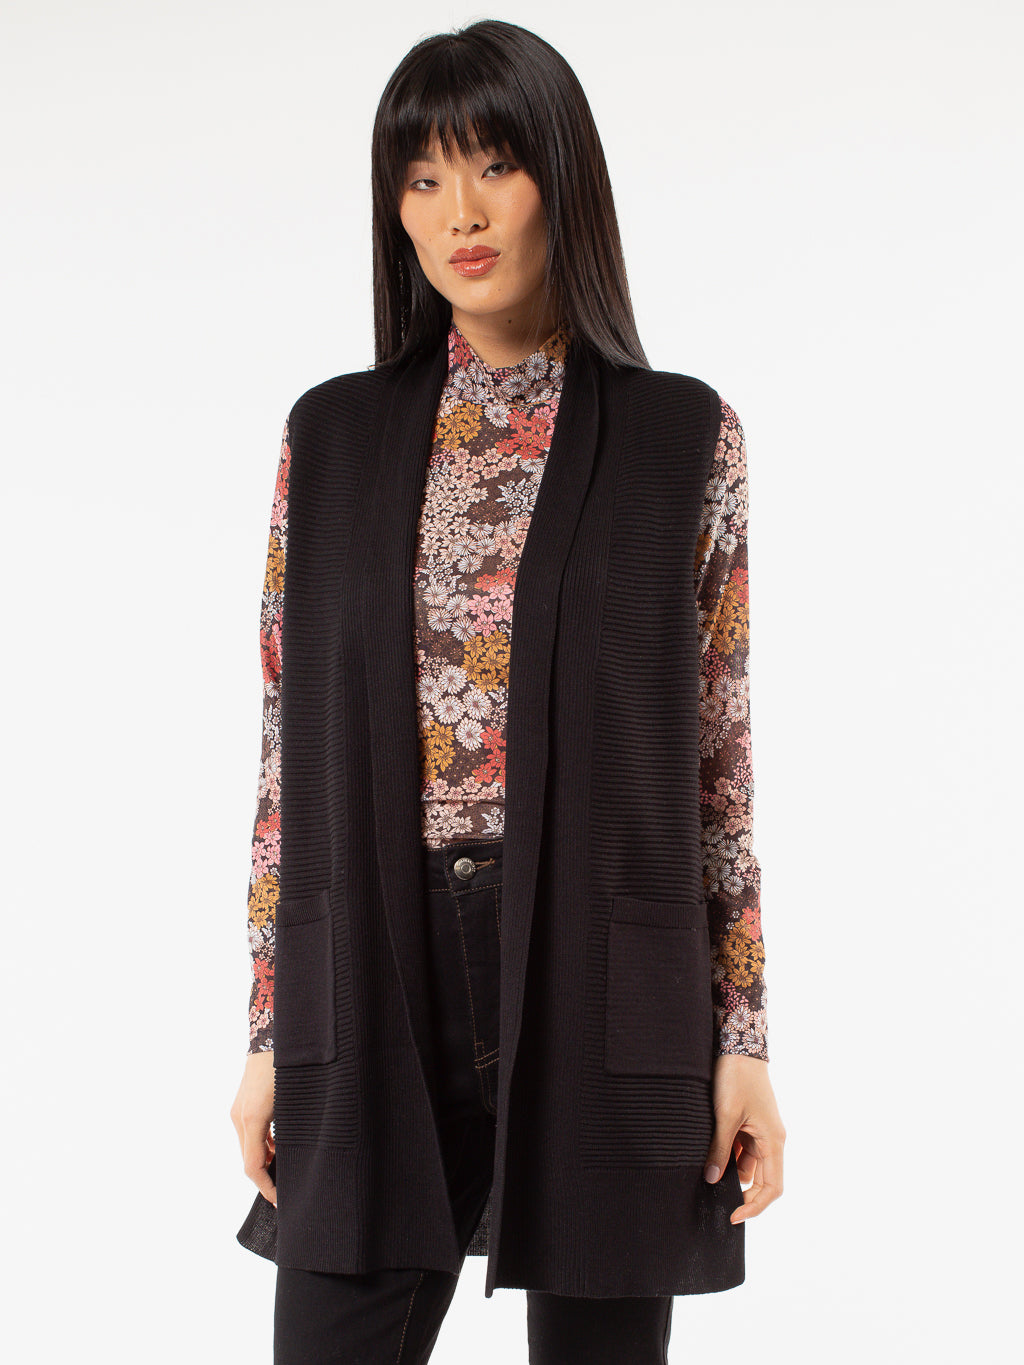 Sleeveless fitted knit cardigan